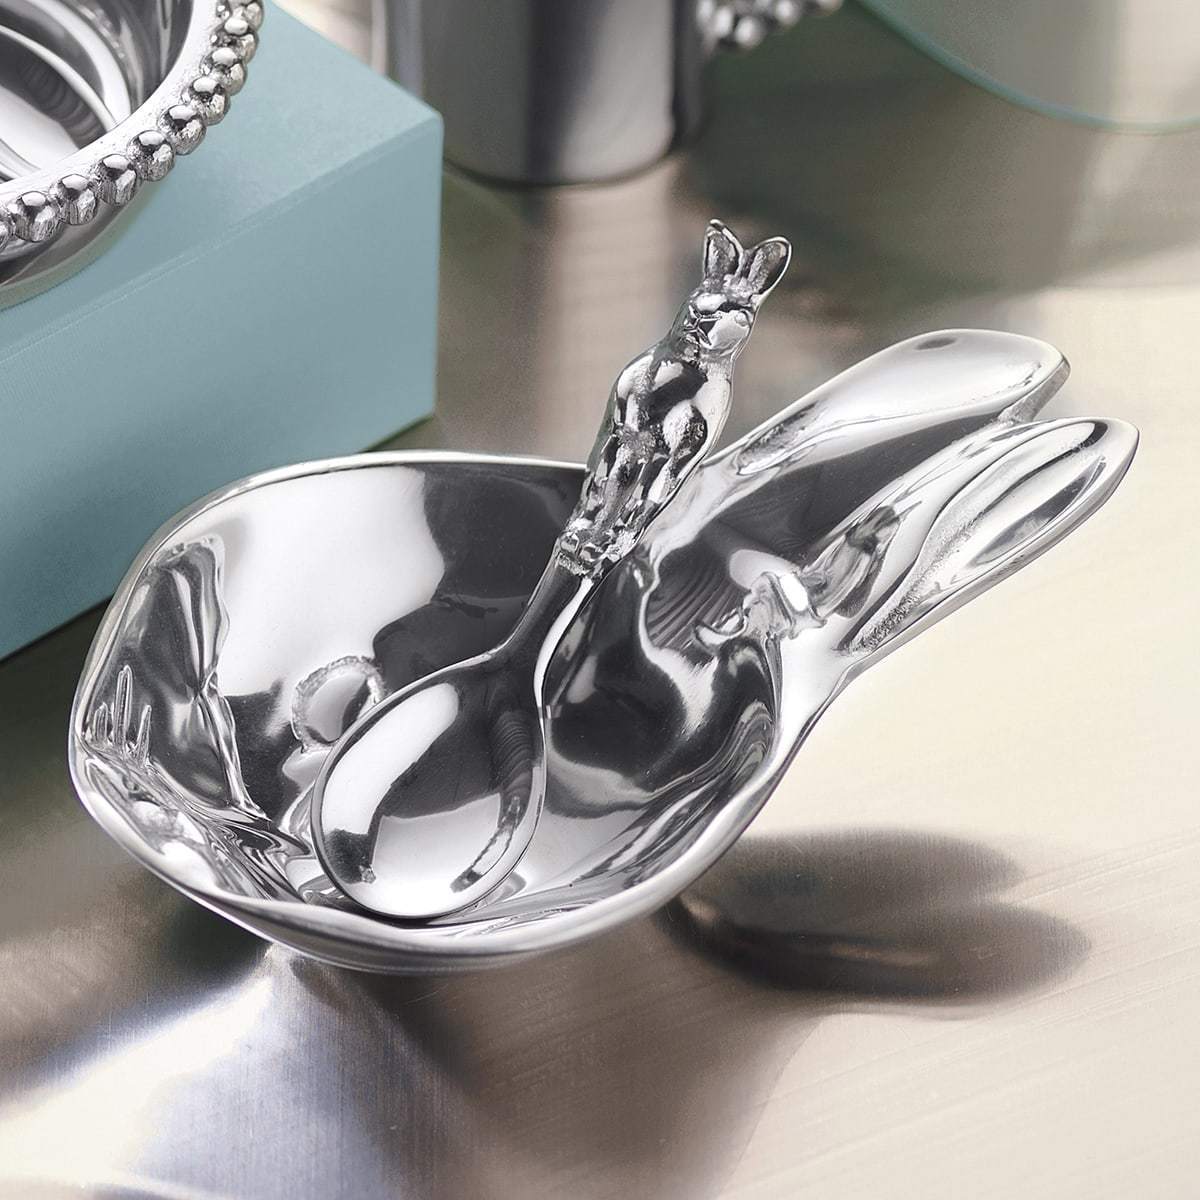 Silver Bunny Porringer Bowl and Spoon Set 2